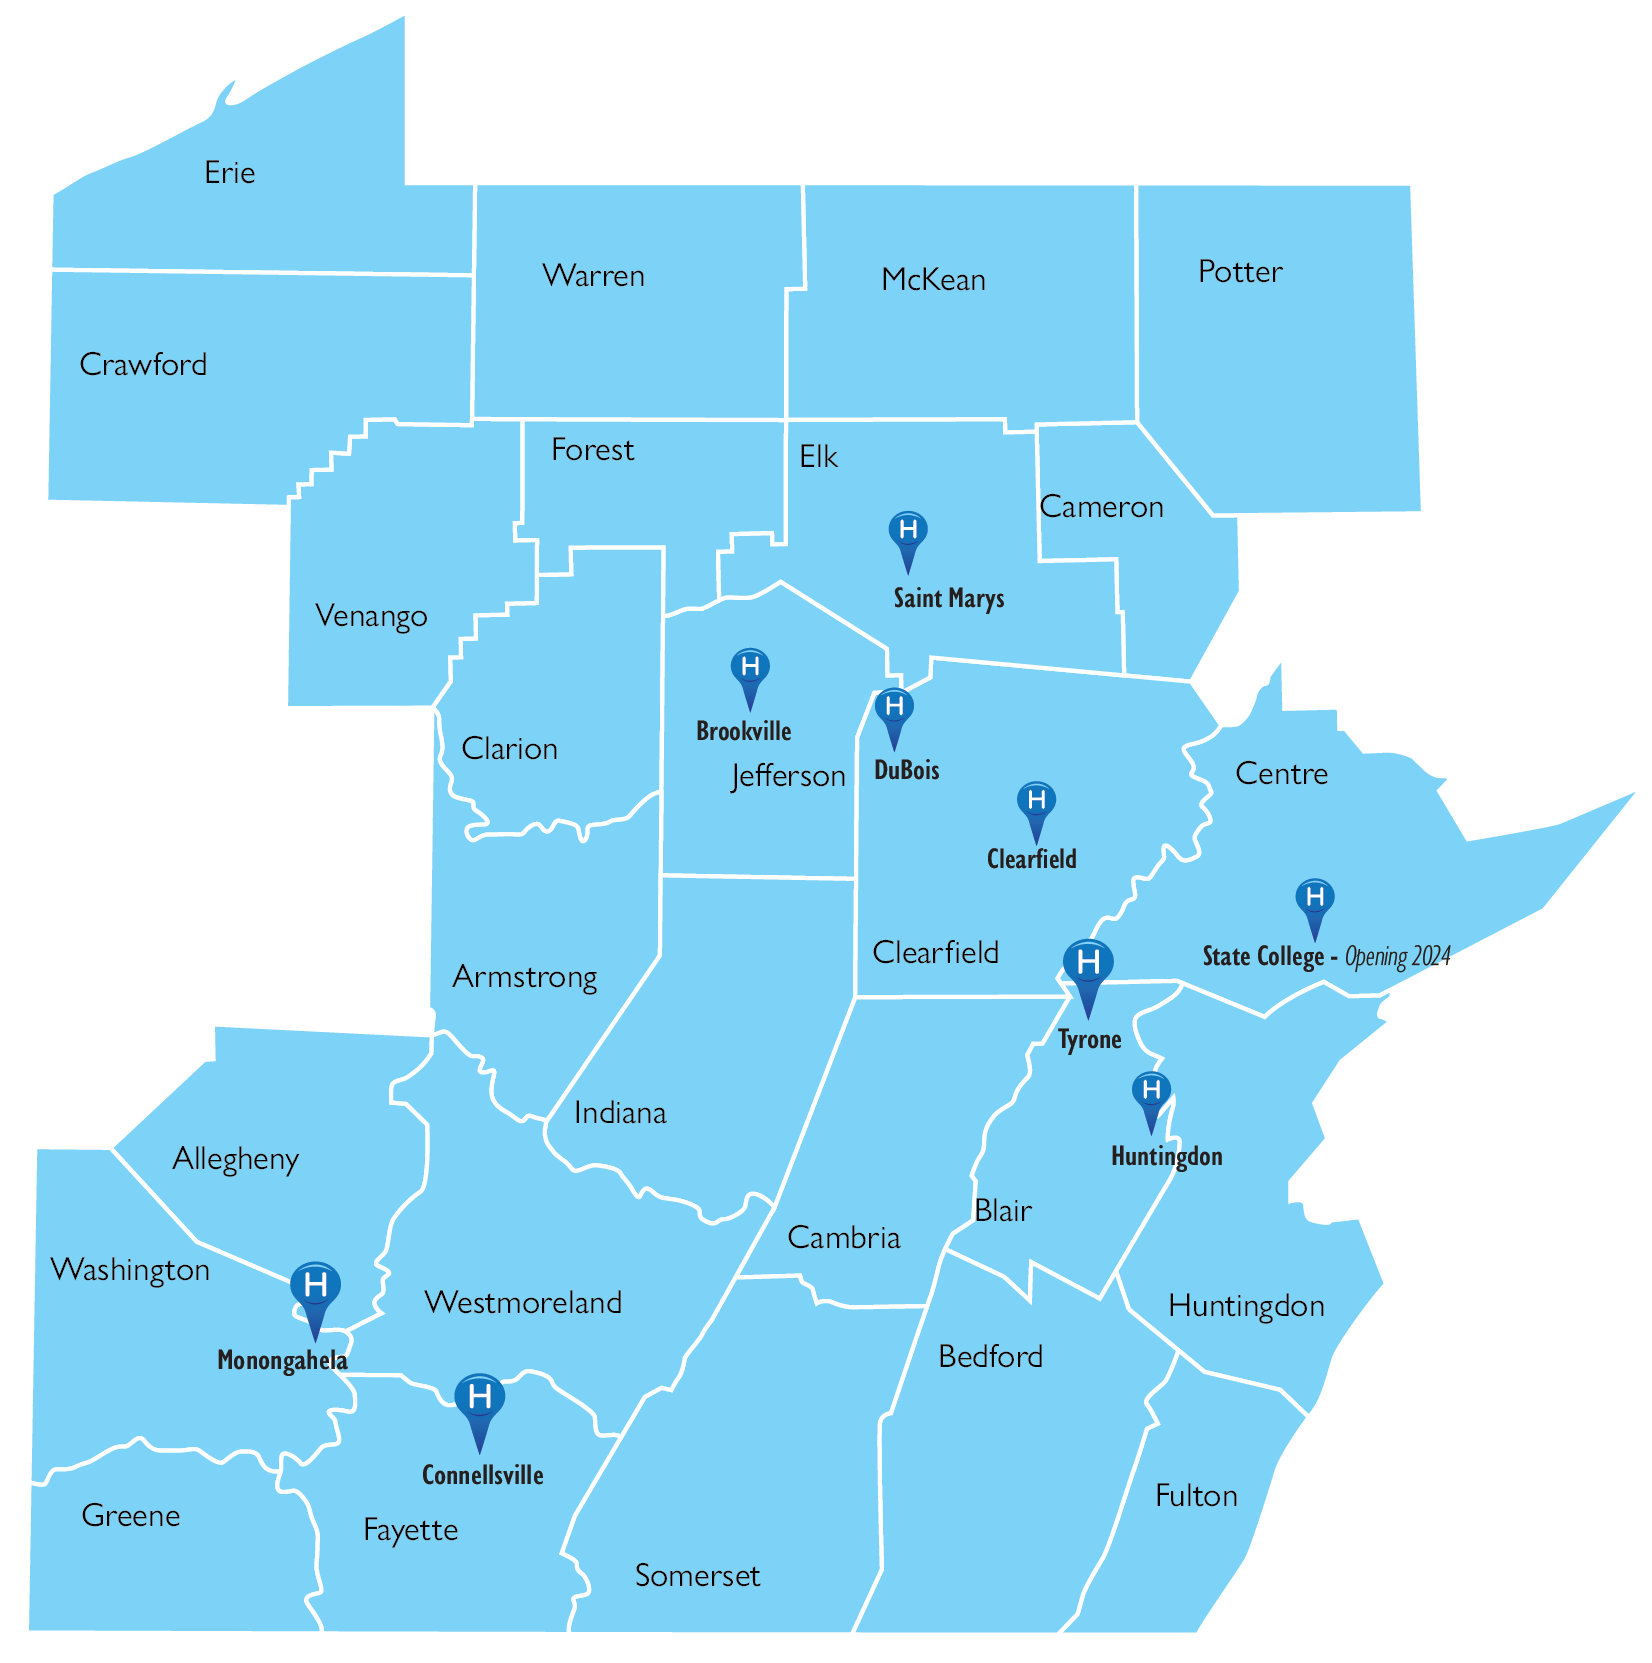 26-county--9-hospital-phh-map-blue-solid